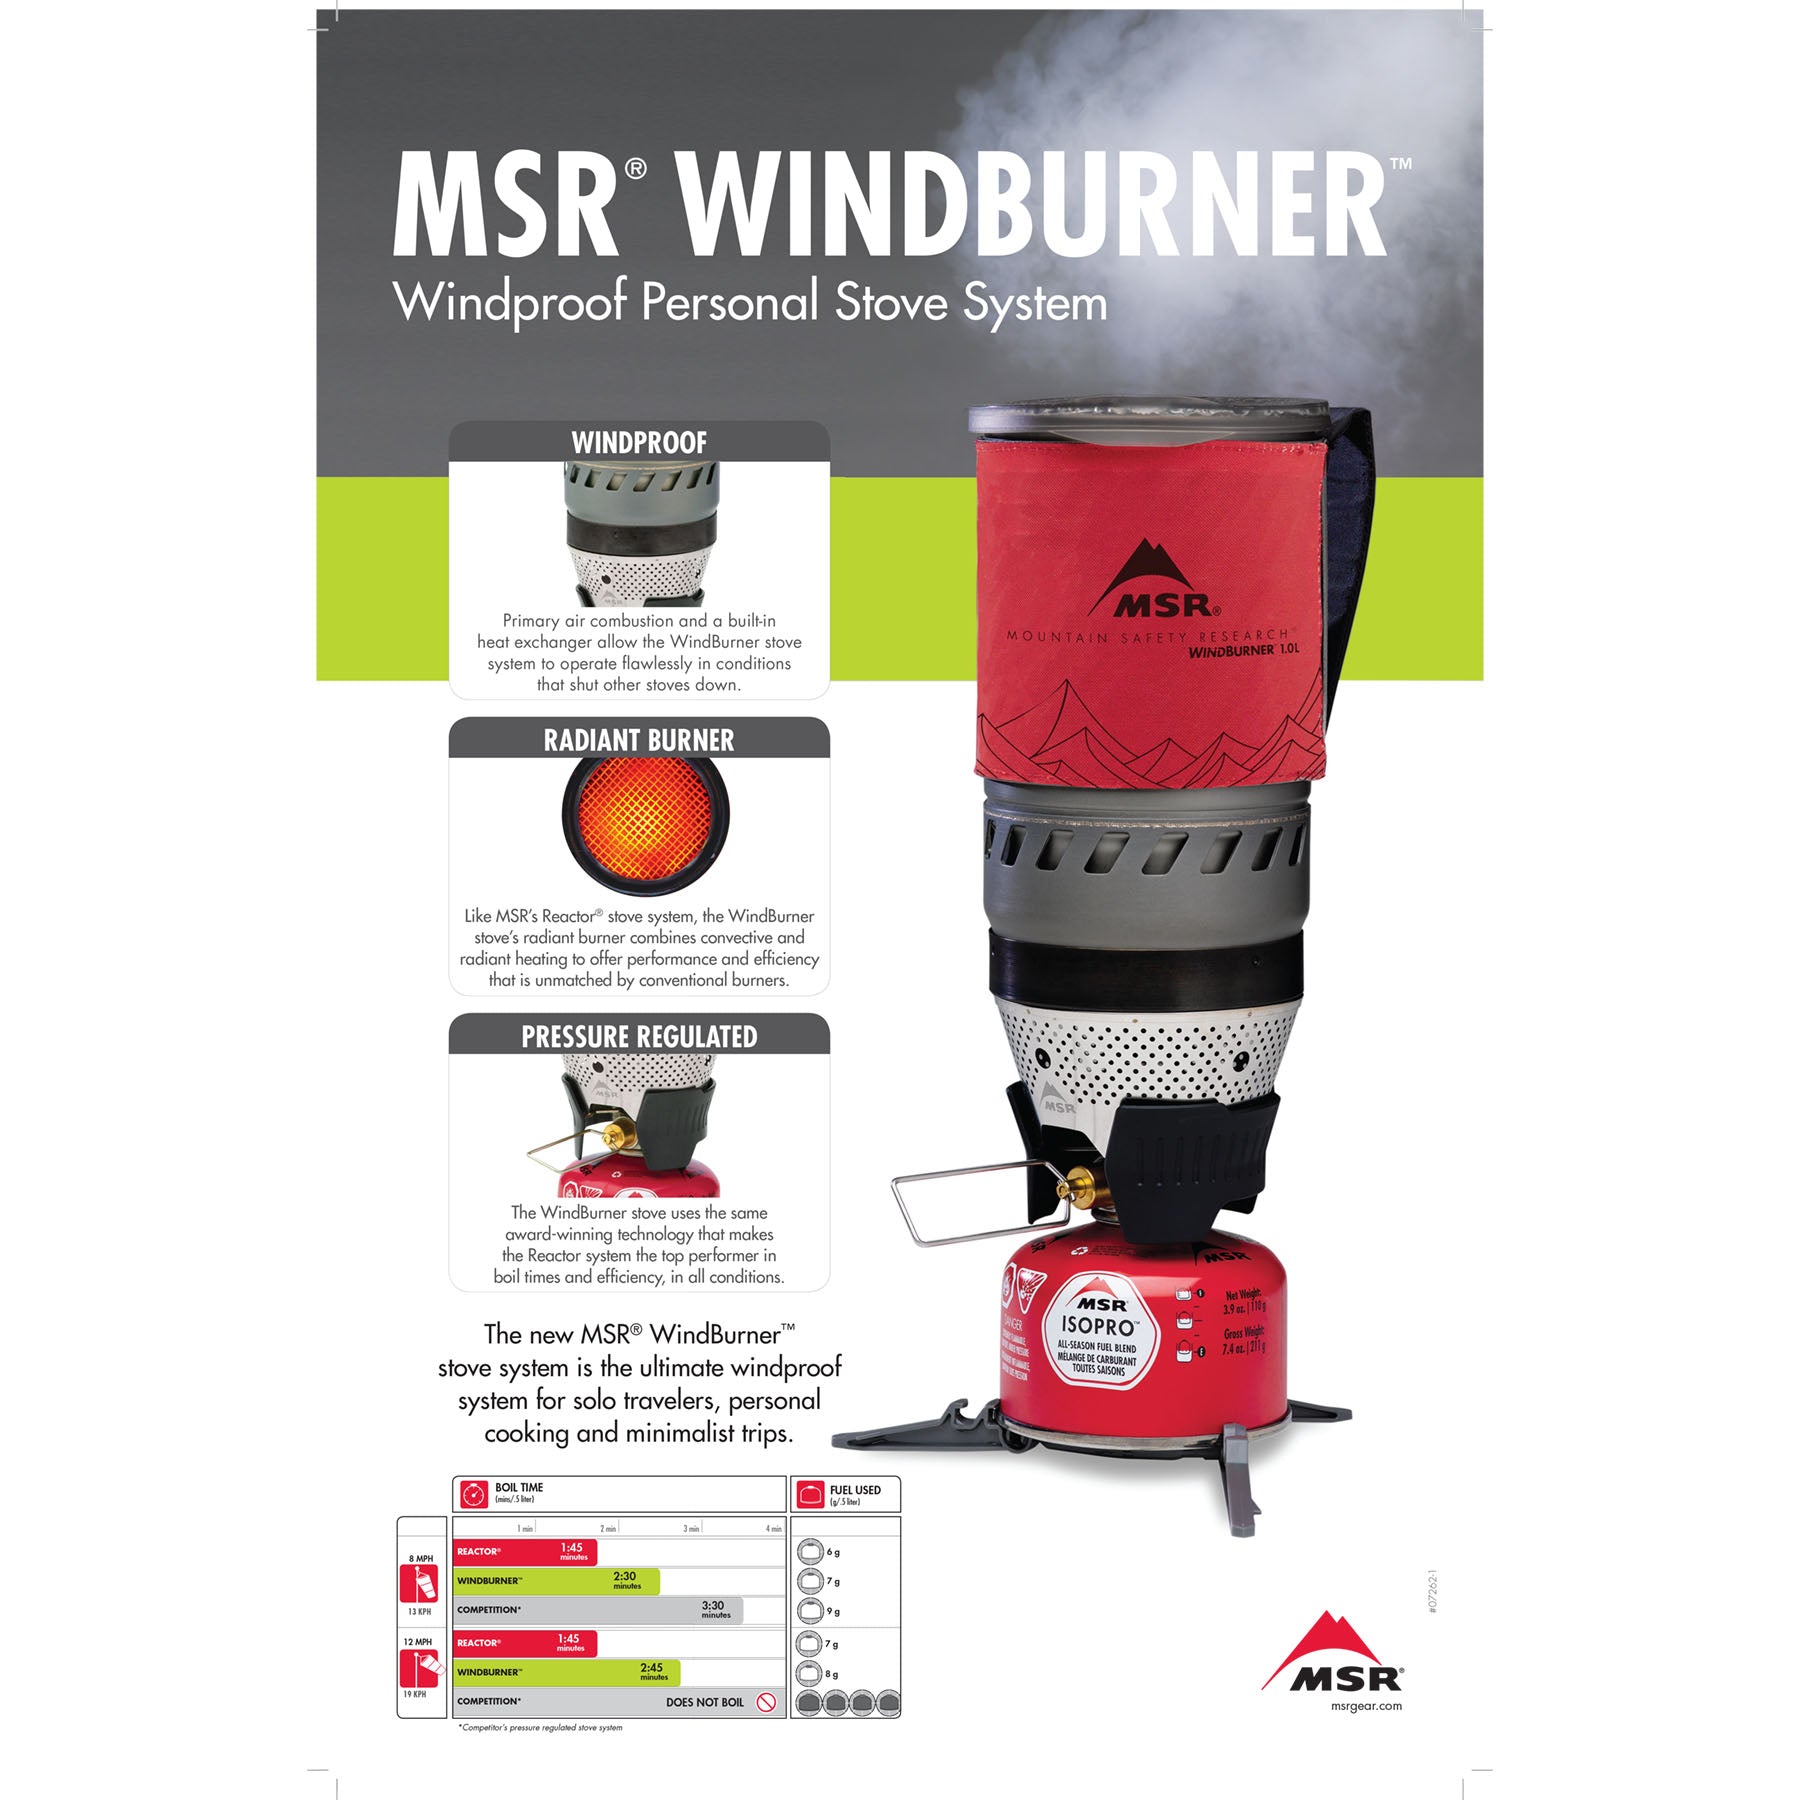 why windburner poster, with specs and other info